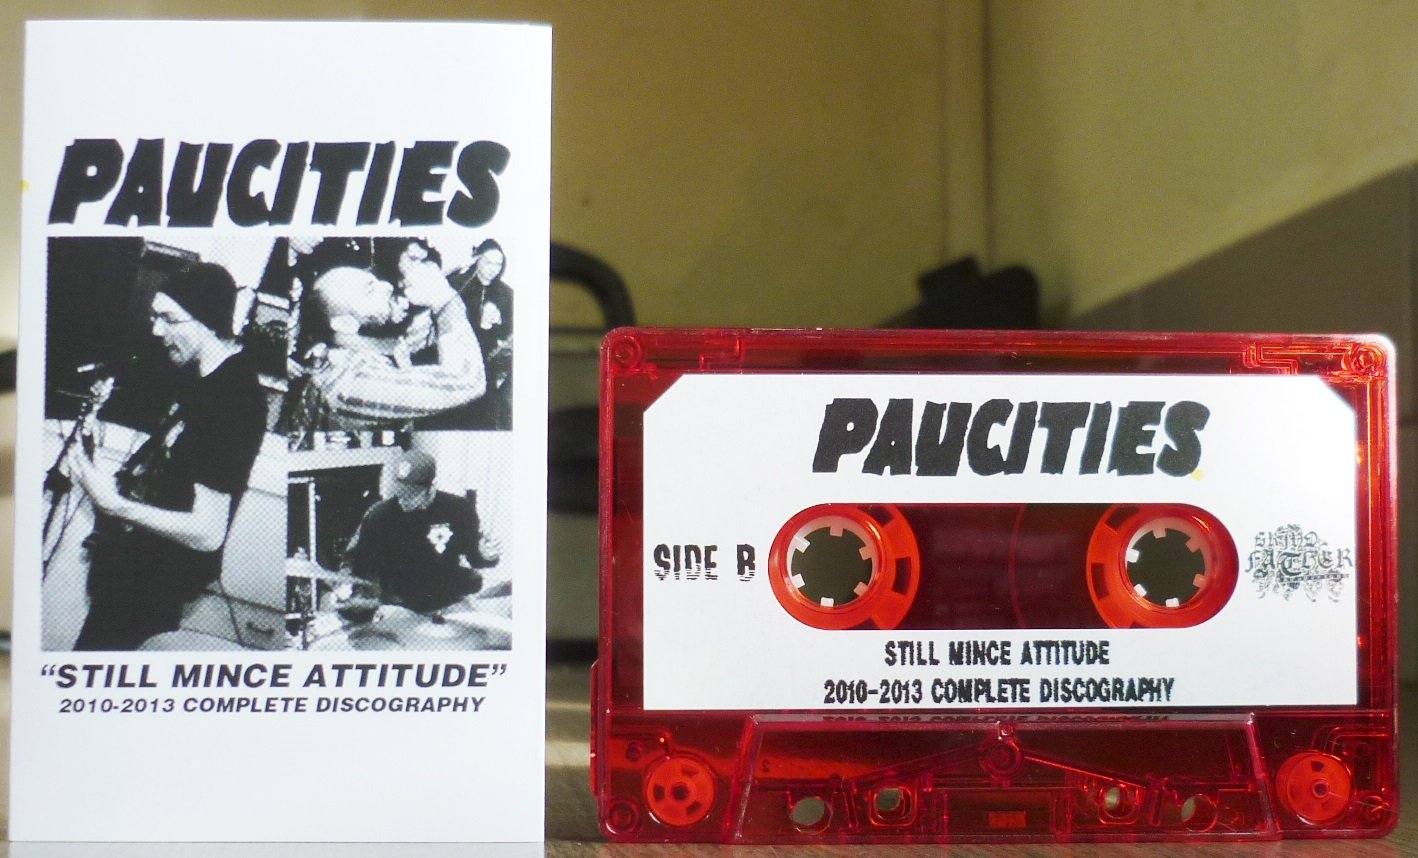 PAUCITIES - Still Mince Attitude 2010-1013 Complete Discography Tape